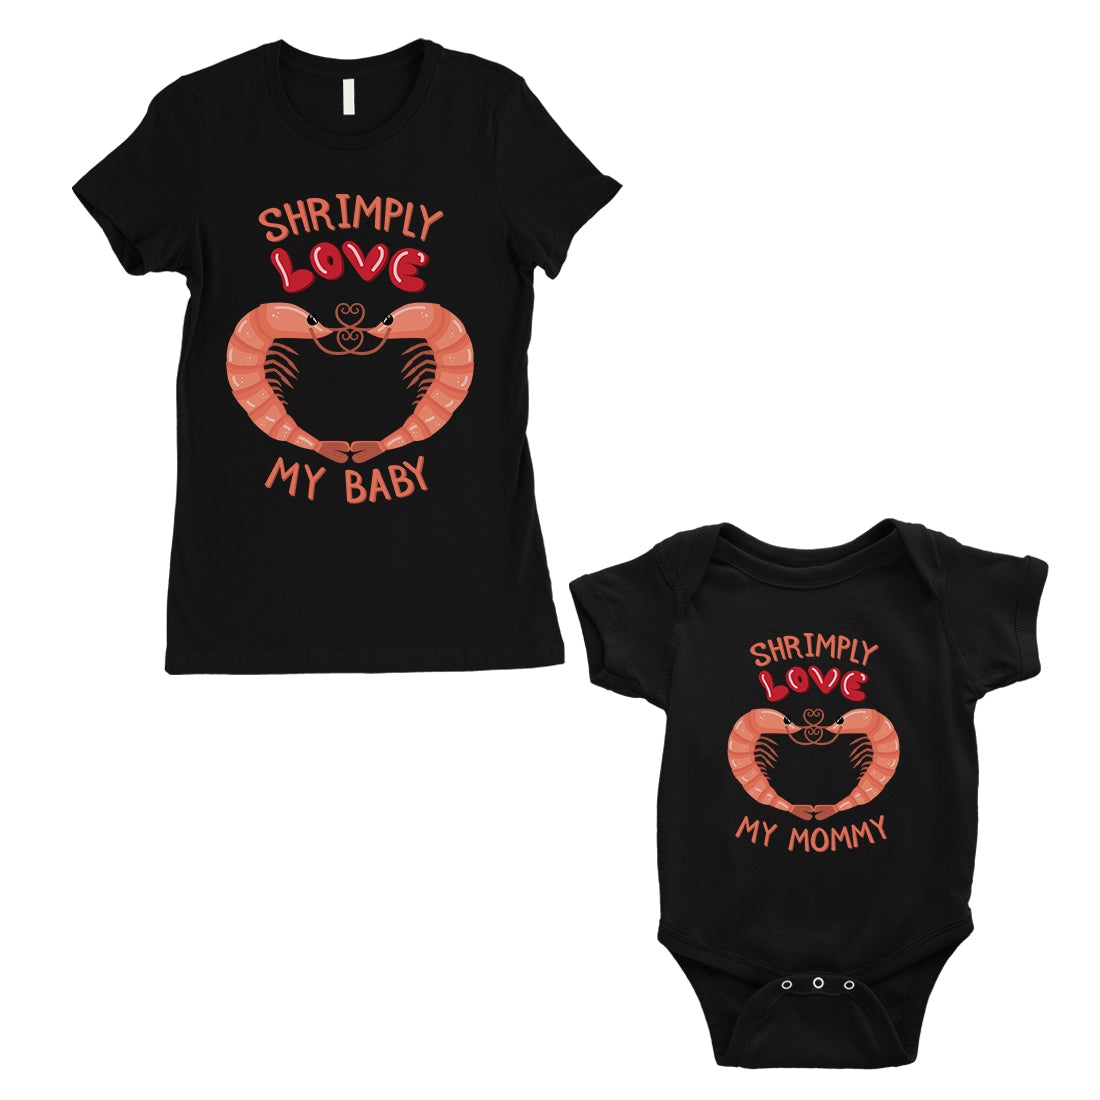 Shrimply Love Baby Mommy Mom and Baby Matching Gift T-Shirts Black